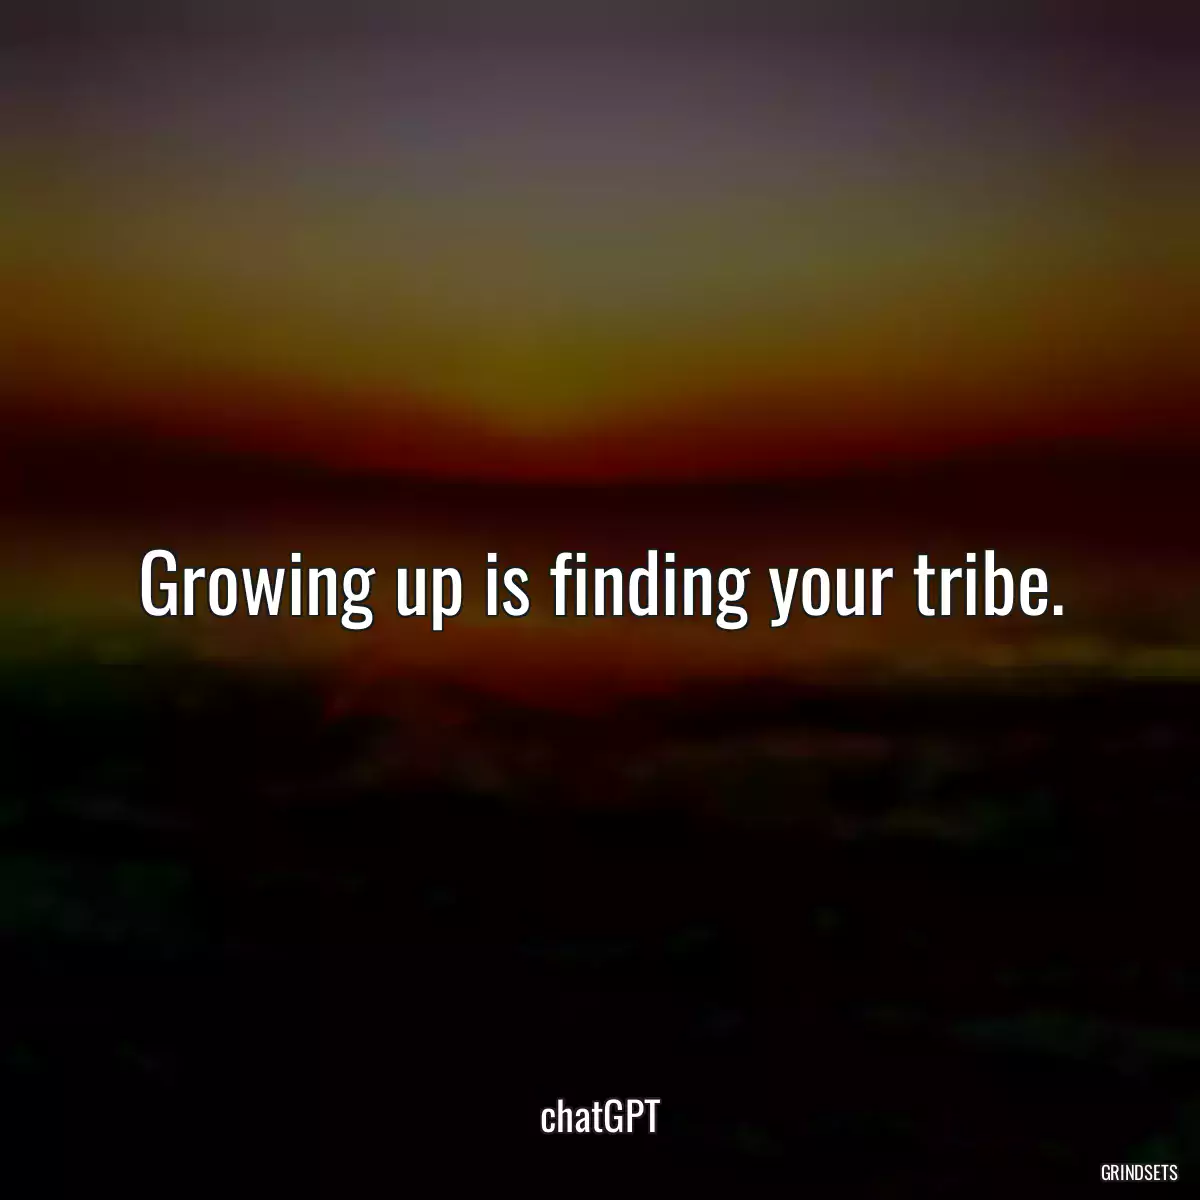 Growing up is finding your tribe.